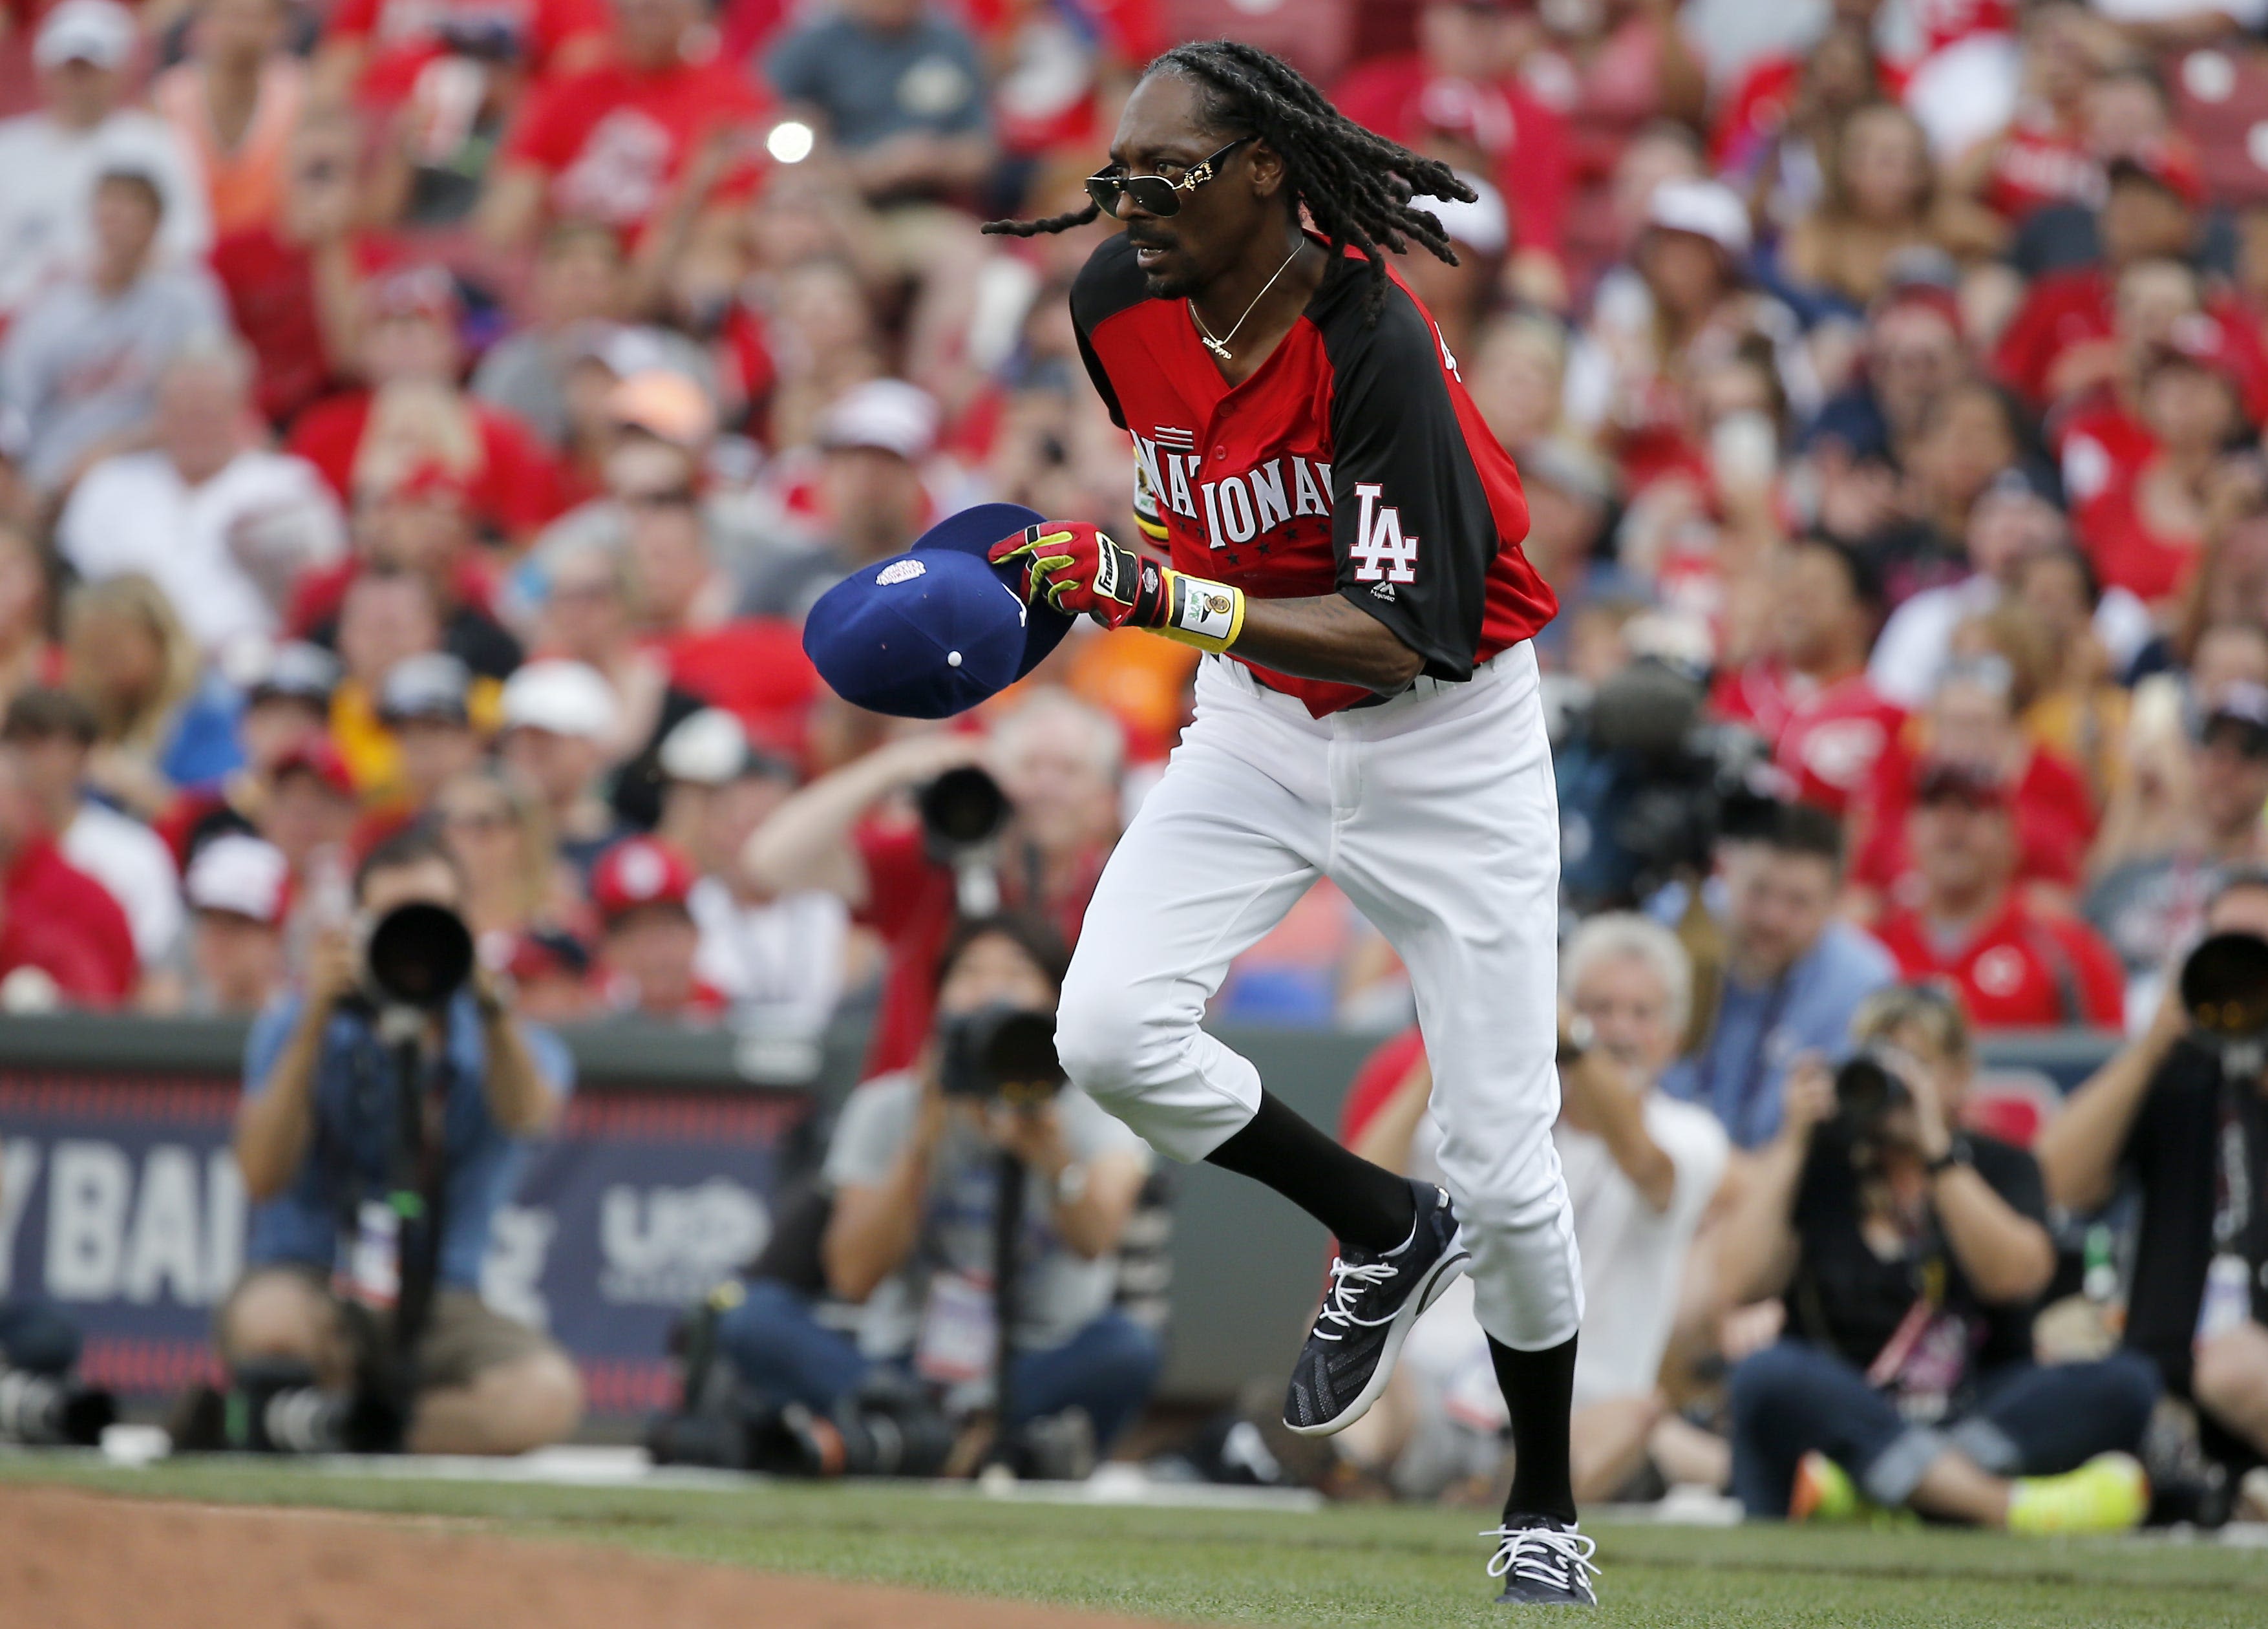 2015 Celebrity Softball Game: When the Reds hosted Snoop Dogg, Miles Teller and more